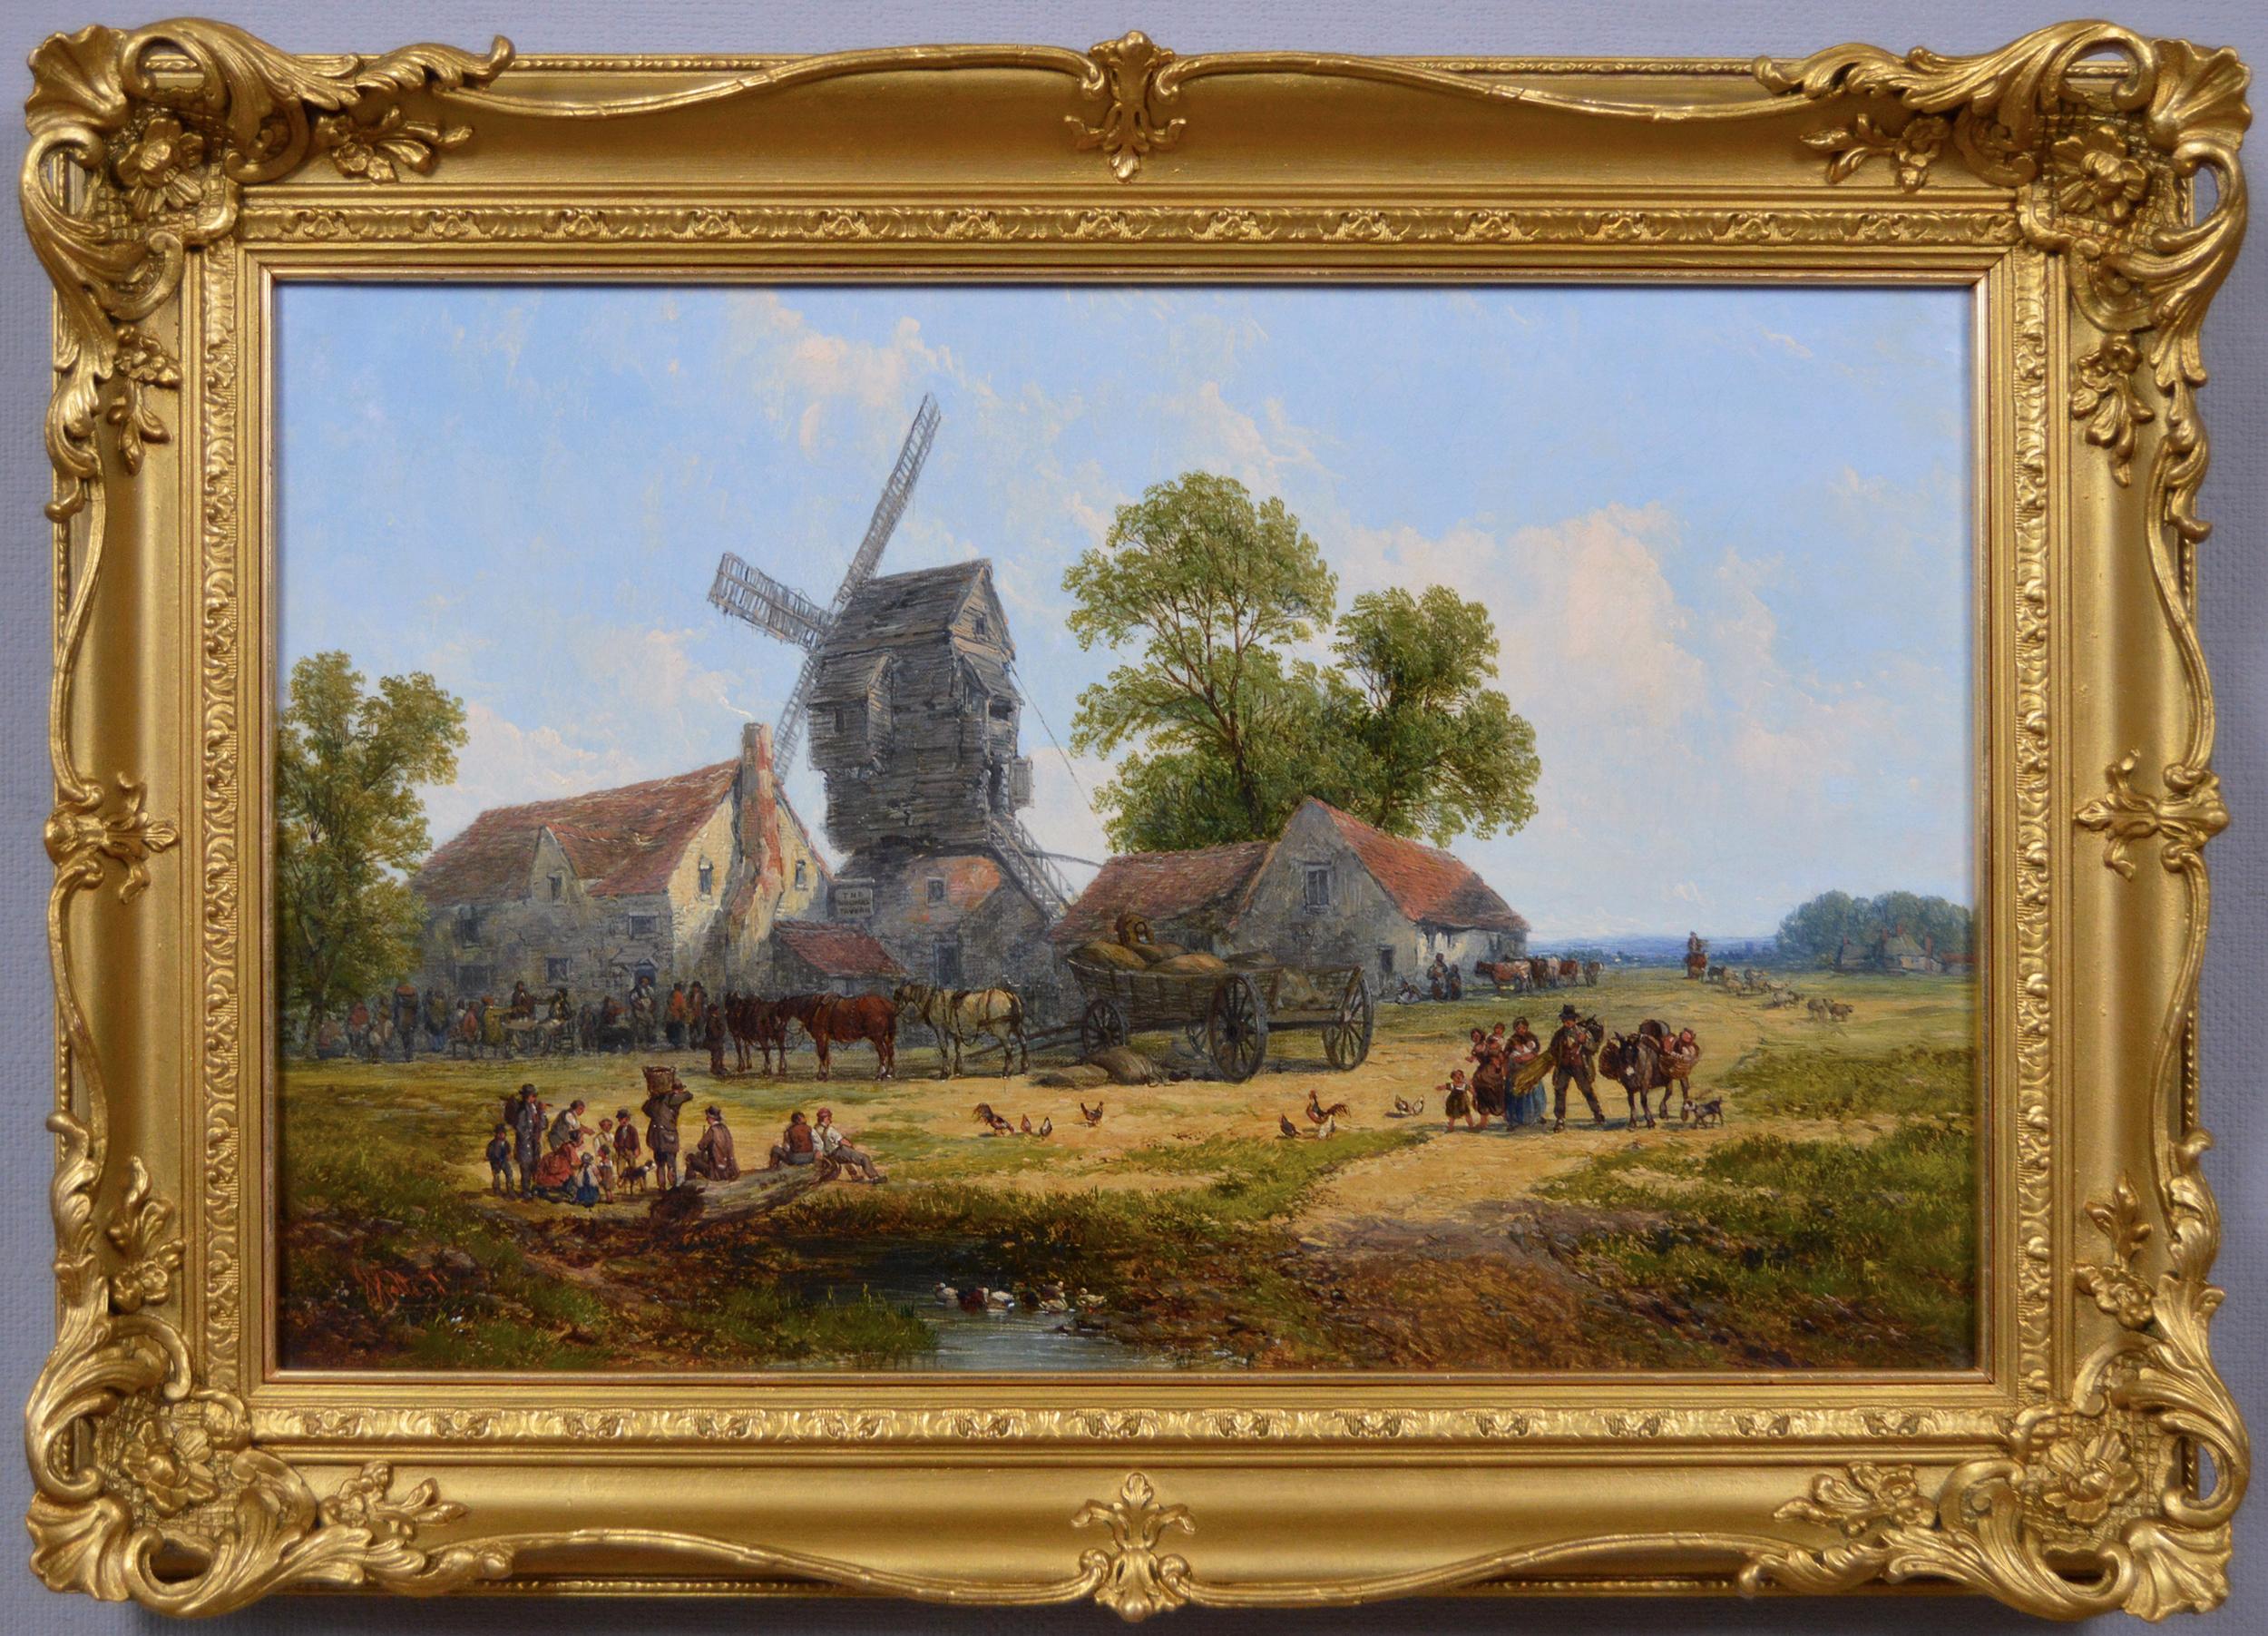 19th century landscape oil painting of a village tavern with a windmill